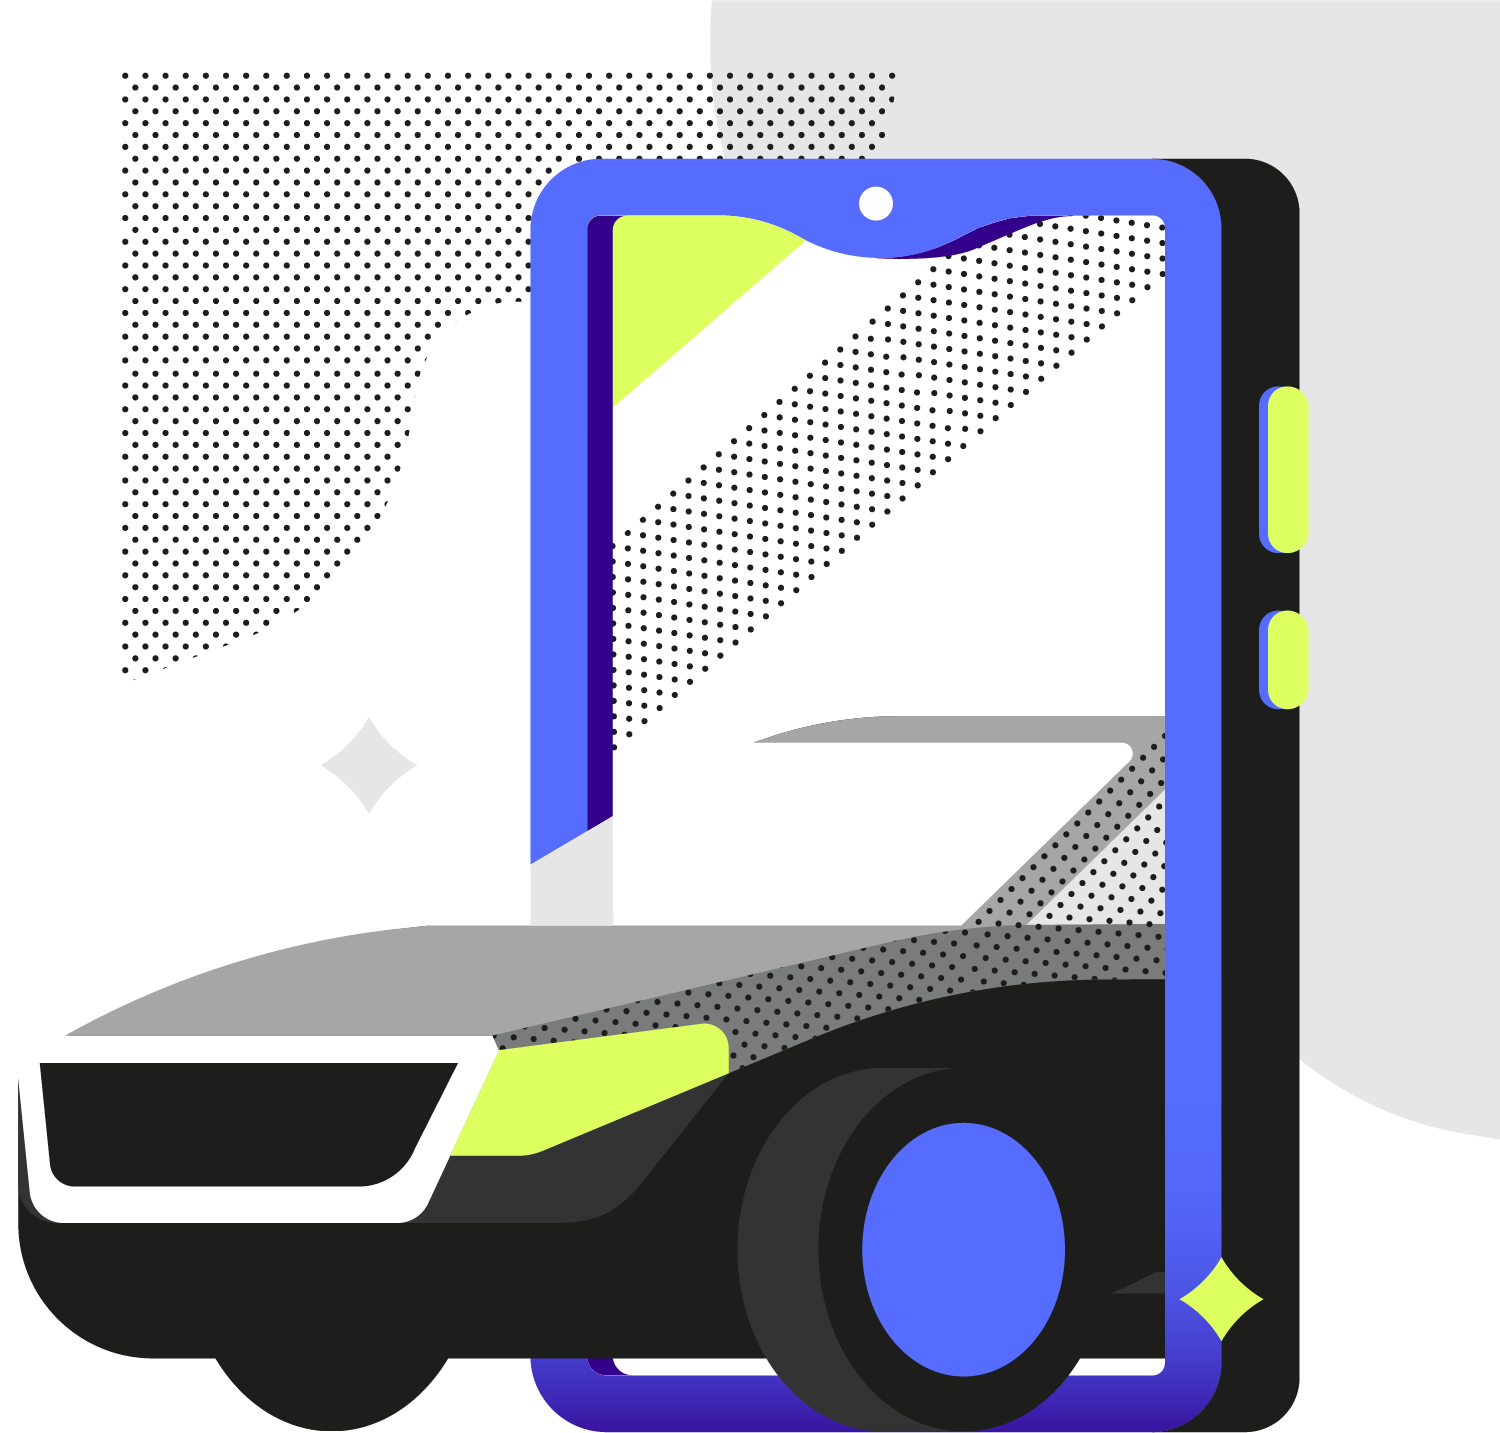 Illustration of a vehicle and a mobile phone